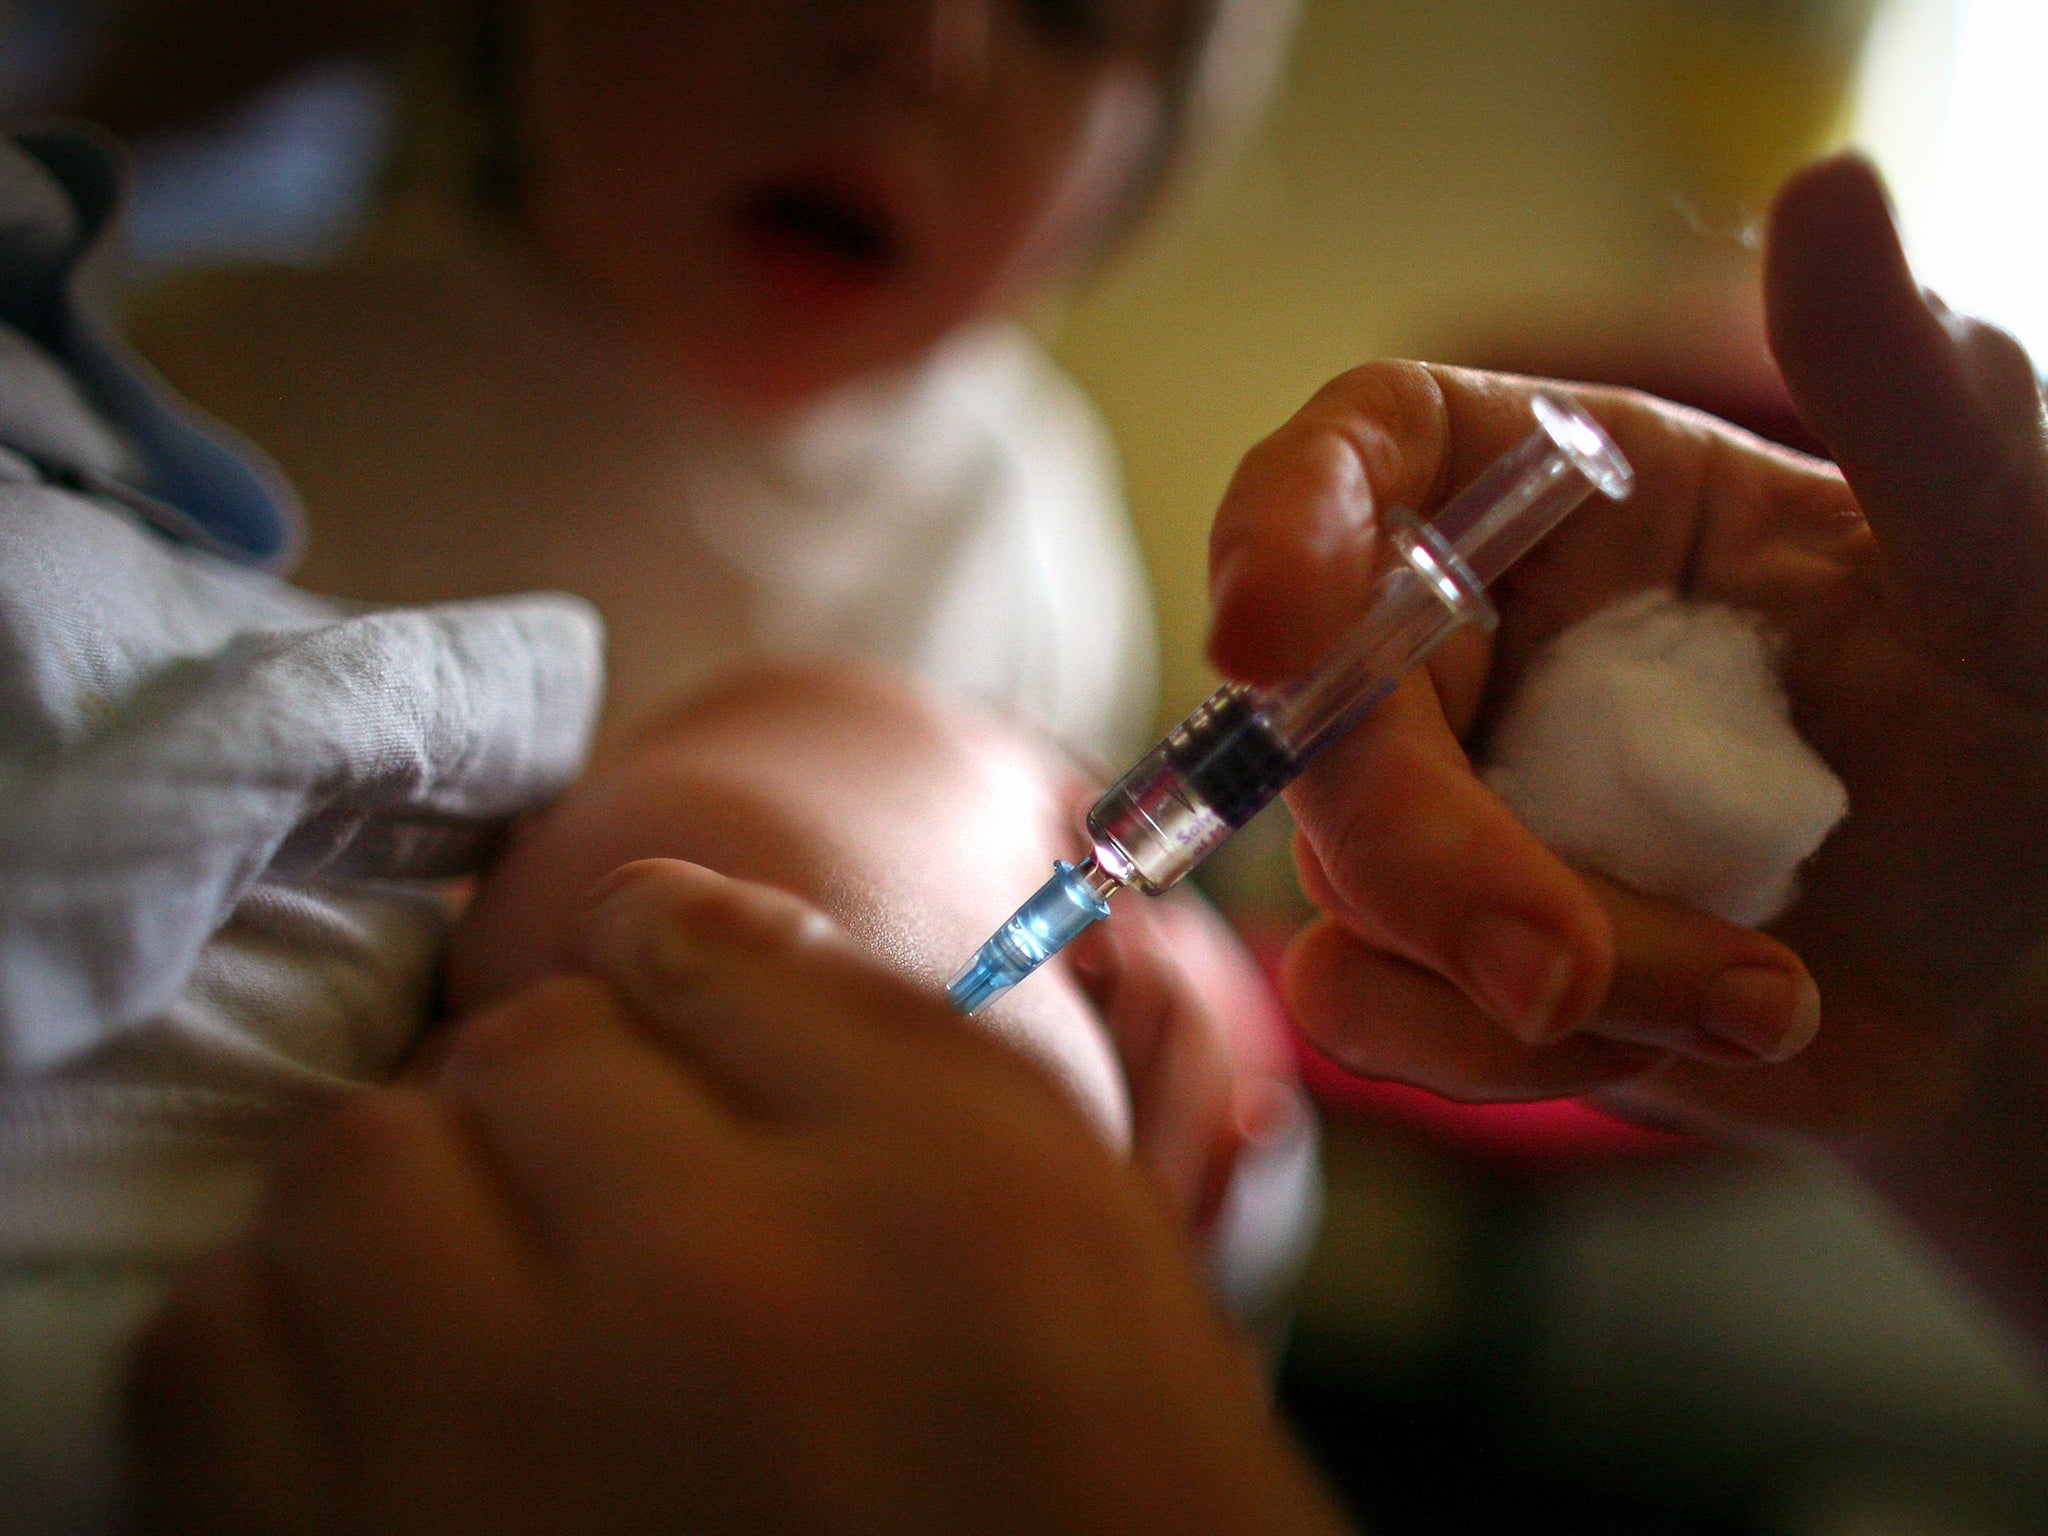 All babies in England will be offered the vaccination at the age of two months